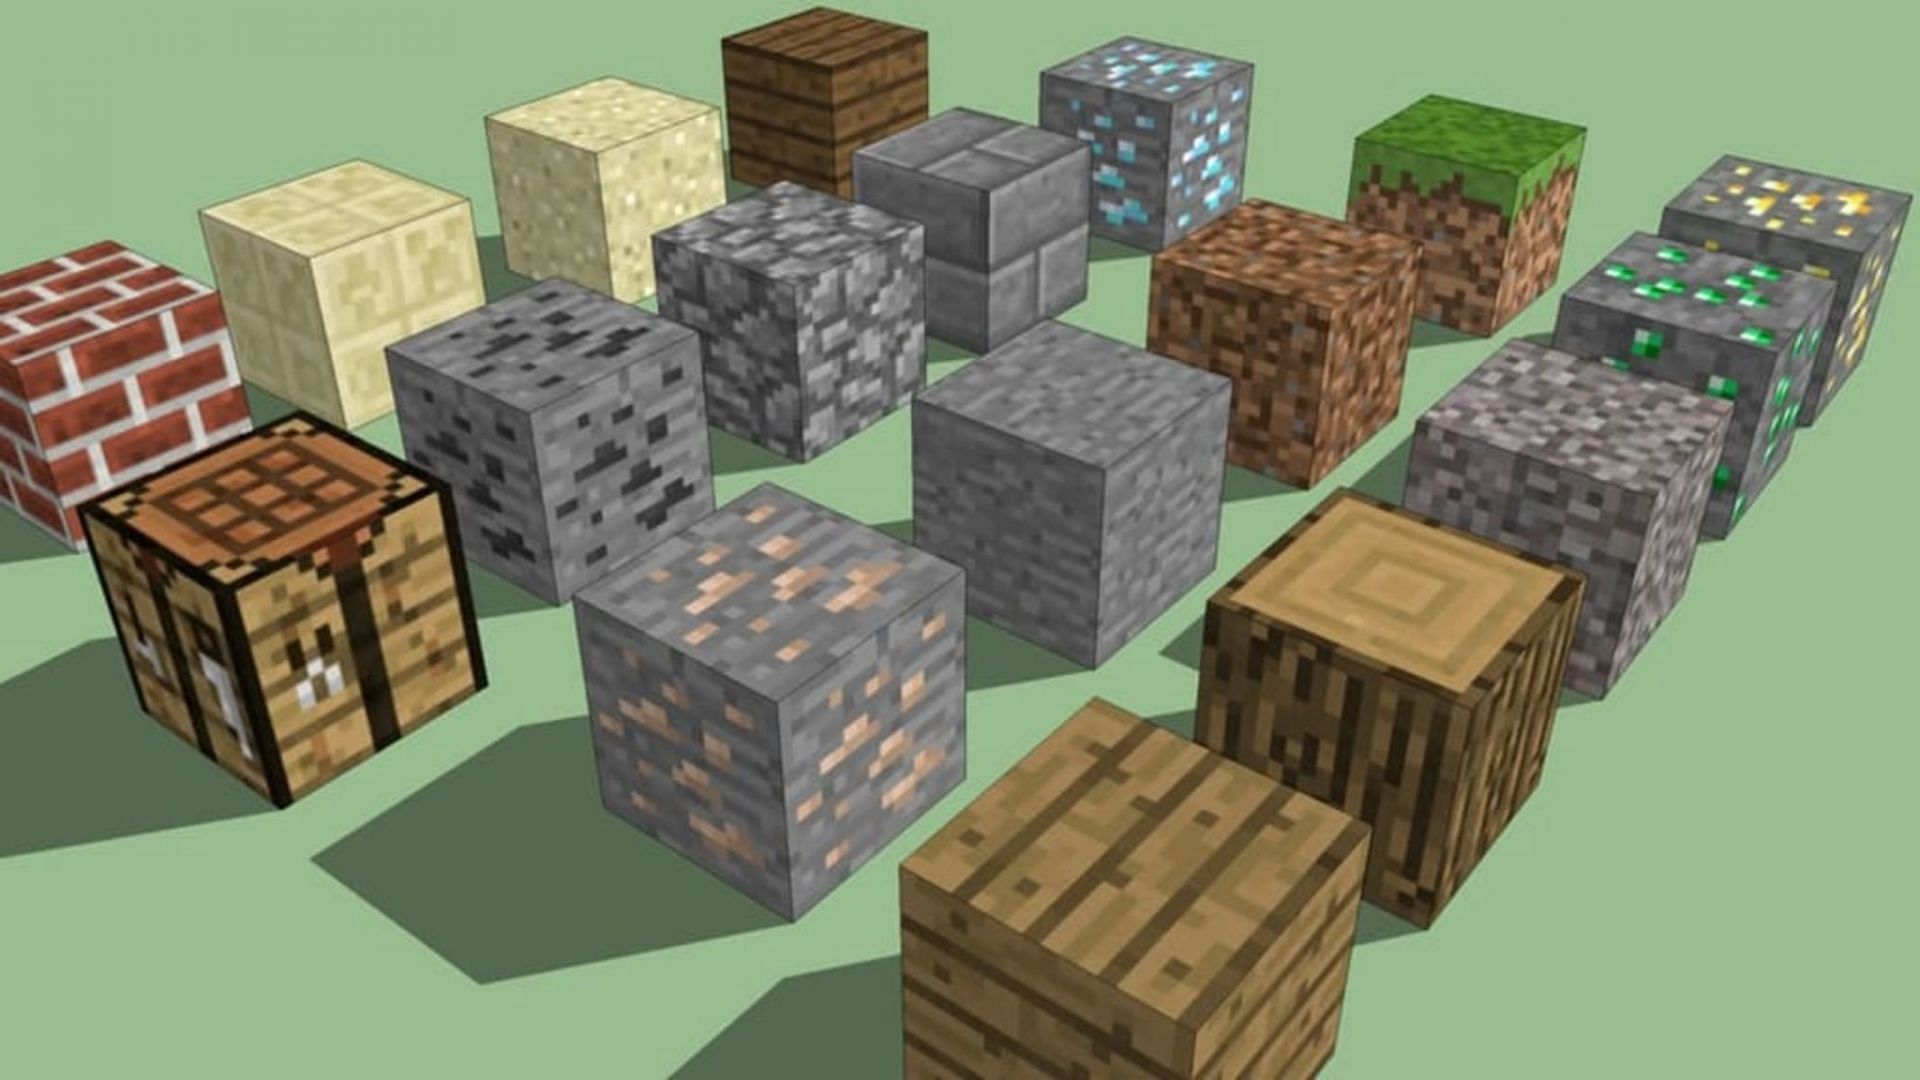 The number of blocks in Minecraft continues to grow (Image via Mojang)